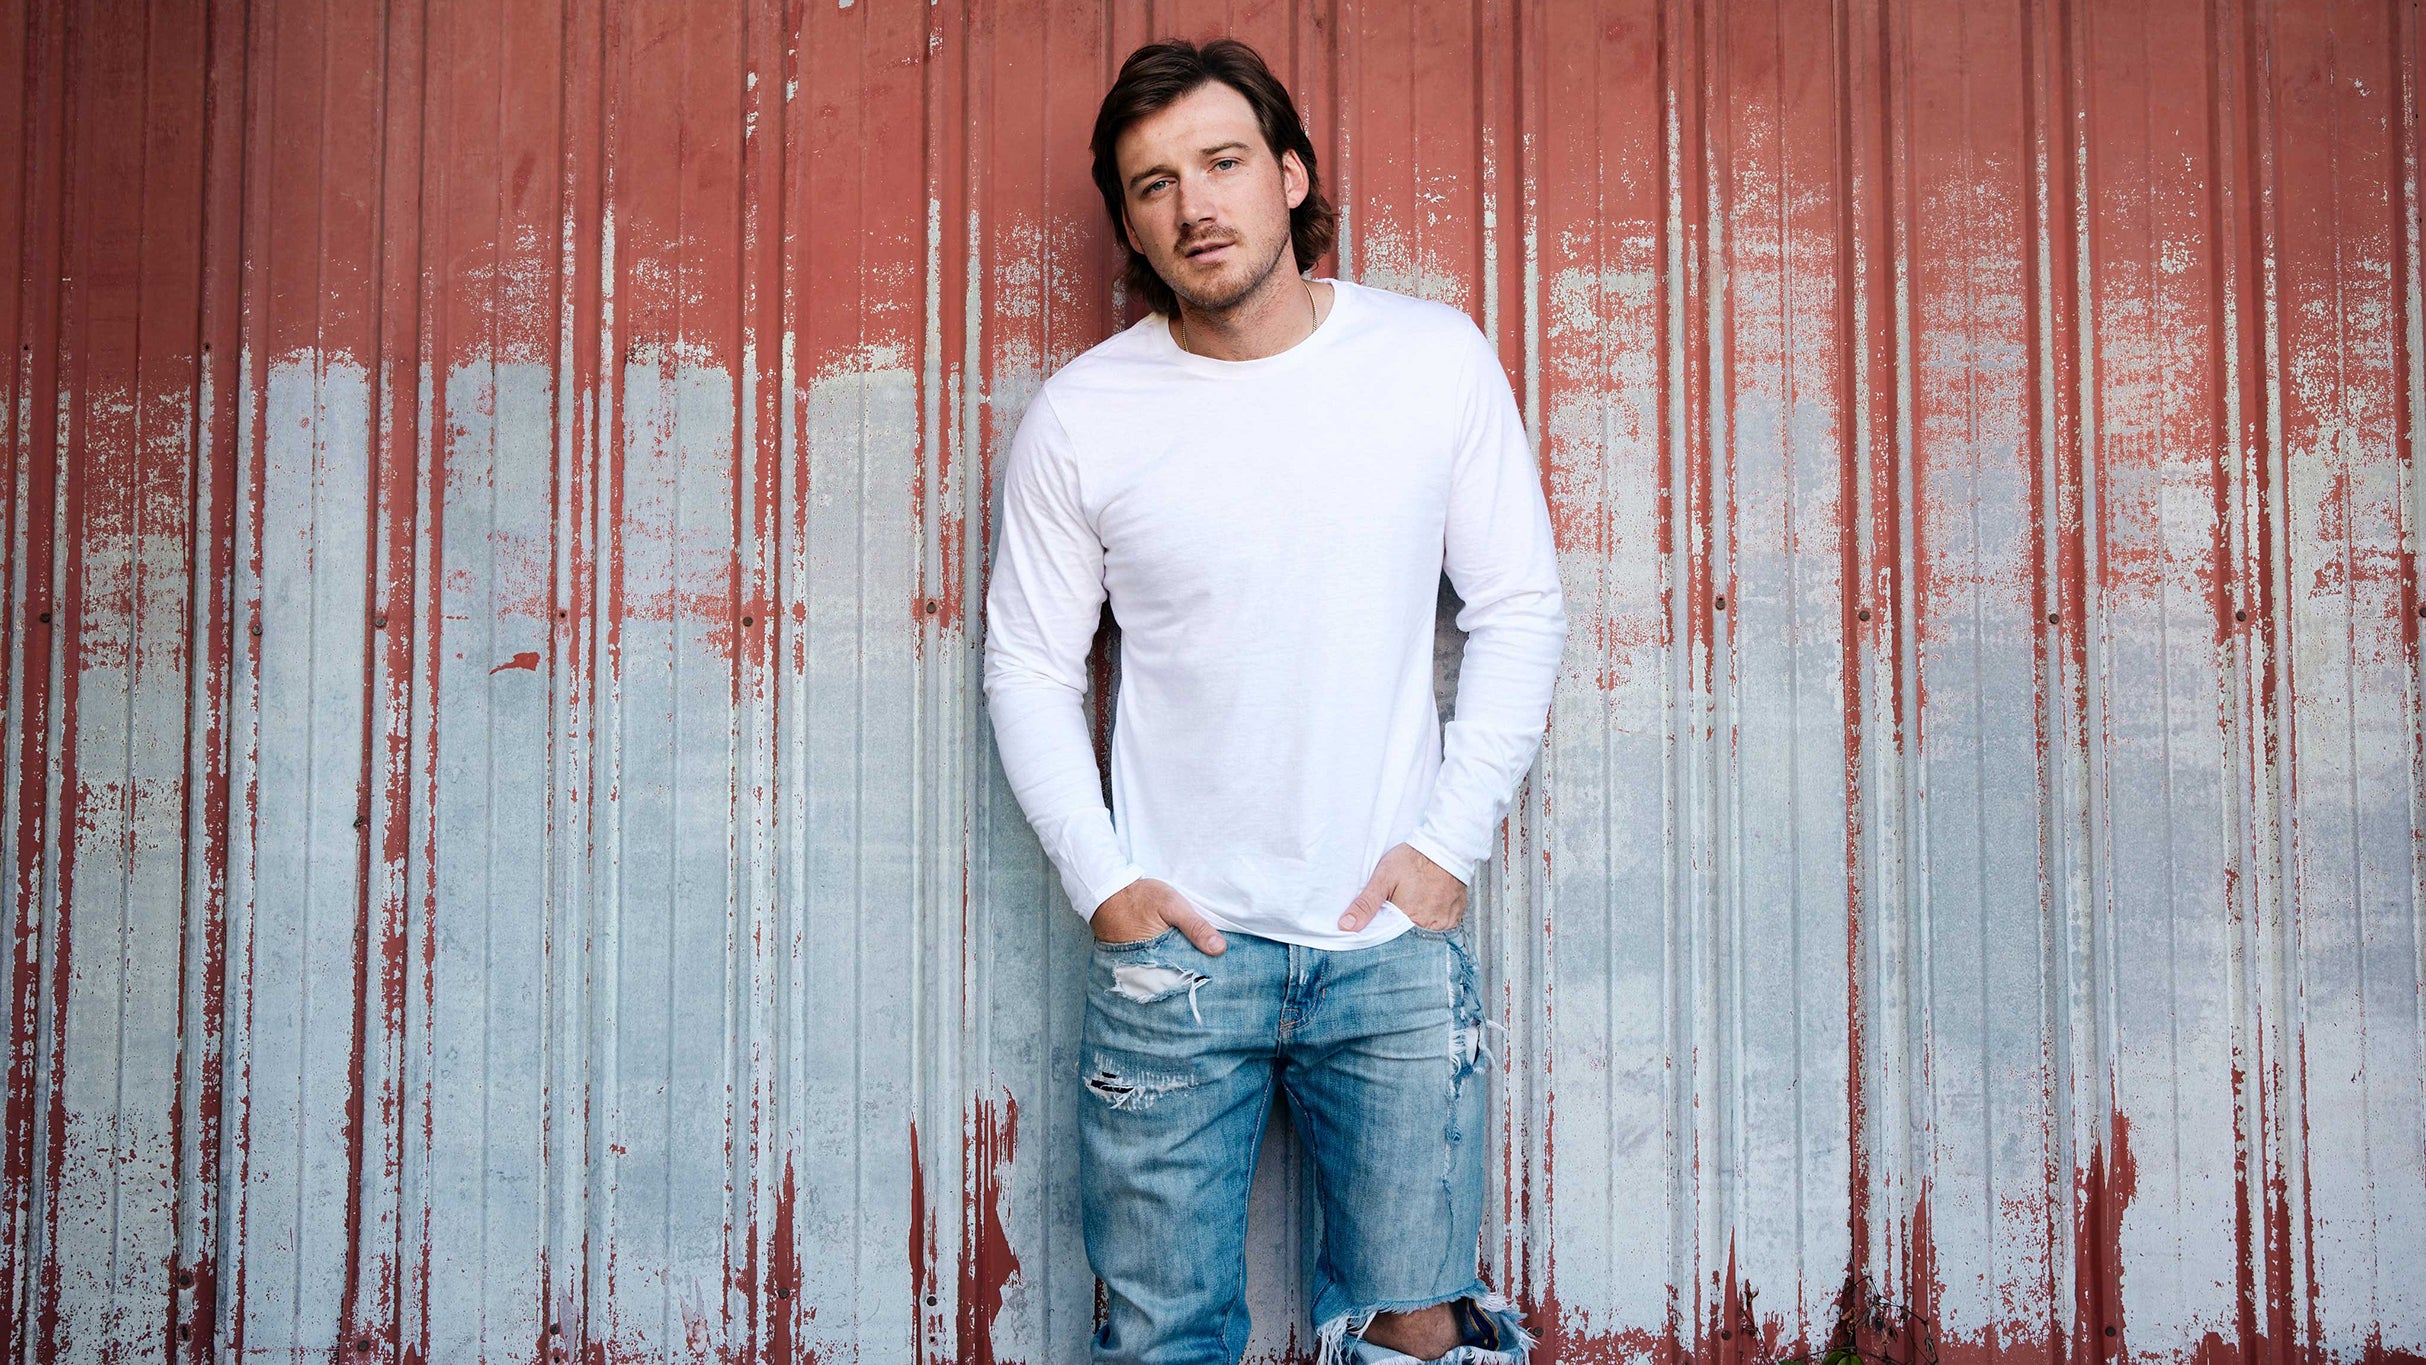 Morgan Wallen: One Night At A Time World Tour in Washington promo photo for Bailey Zimmerman Fan Club presale offer code